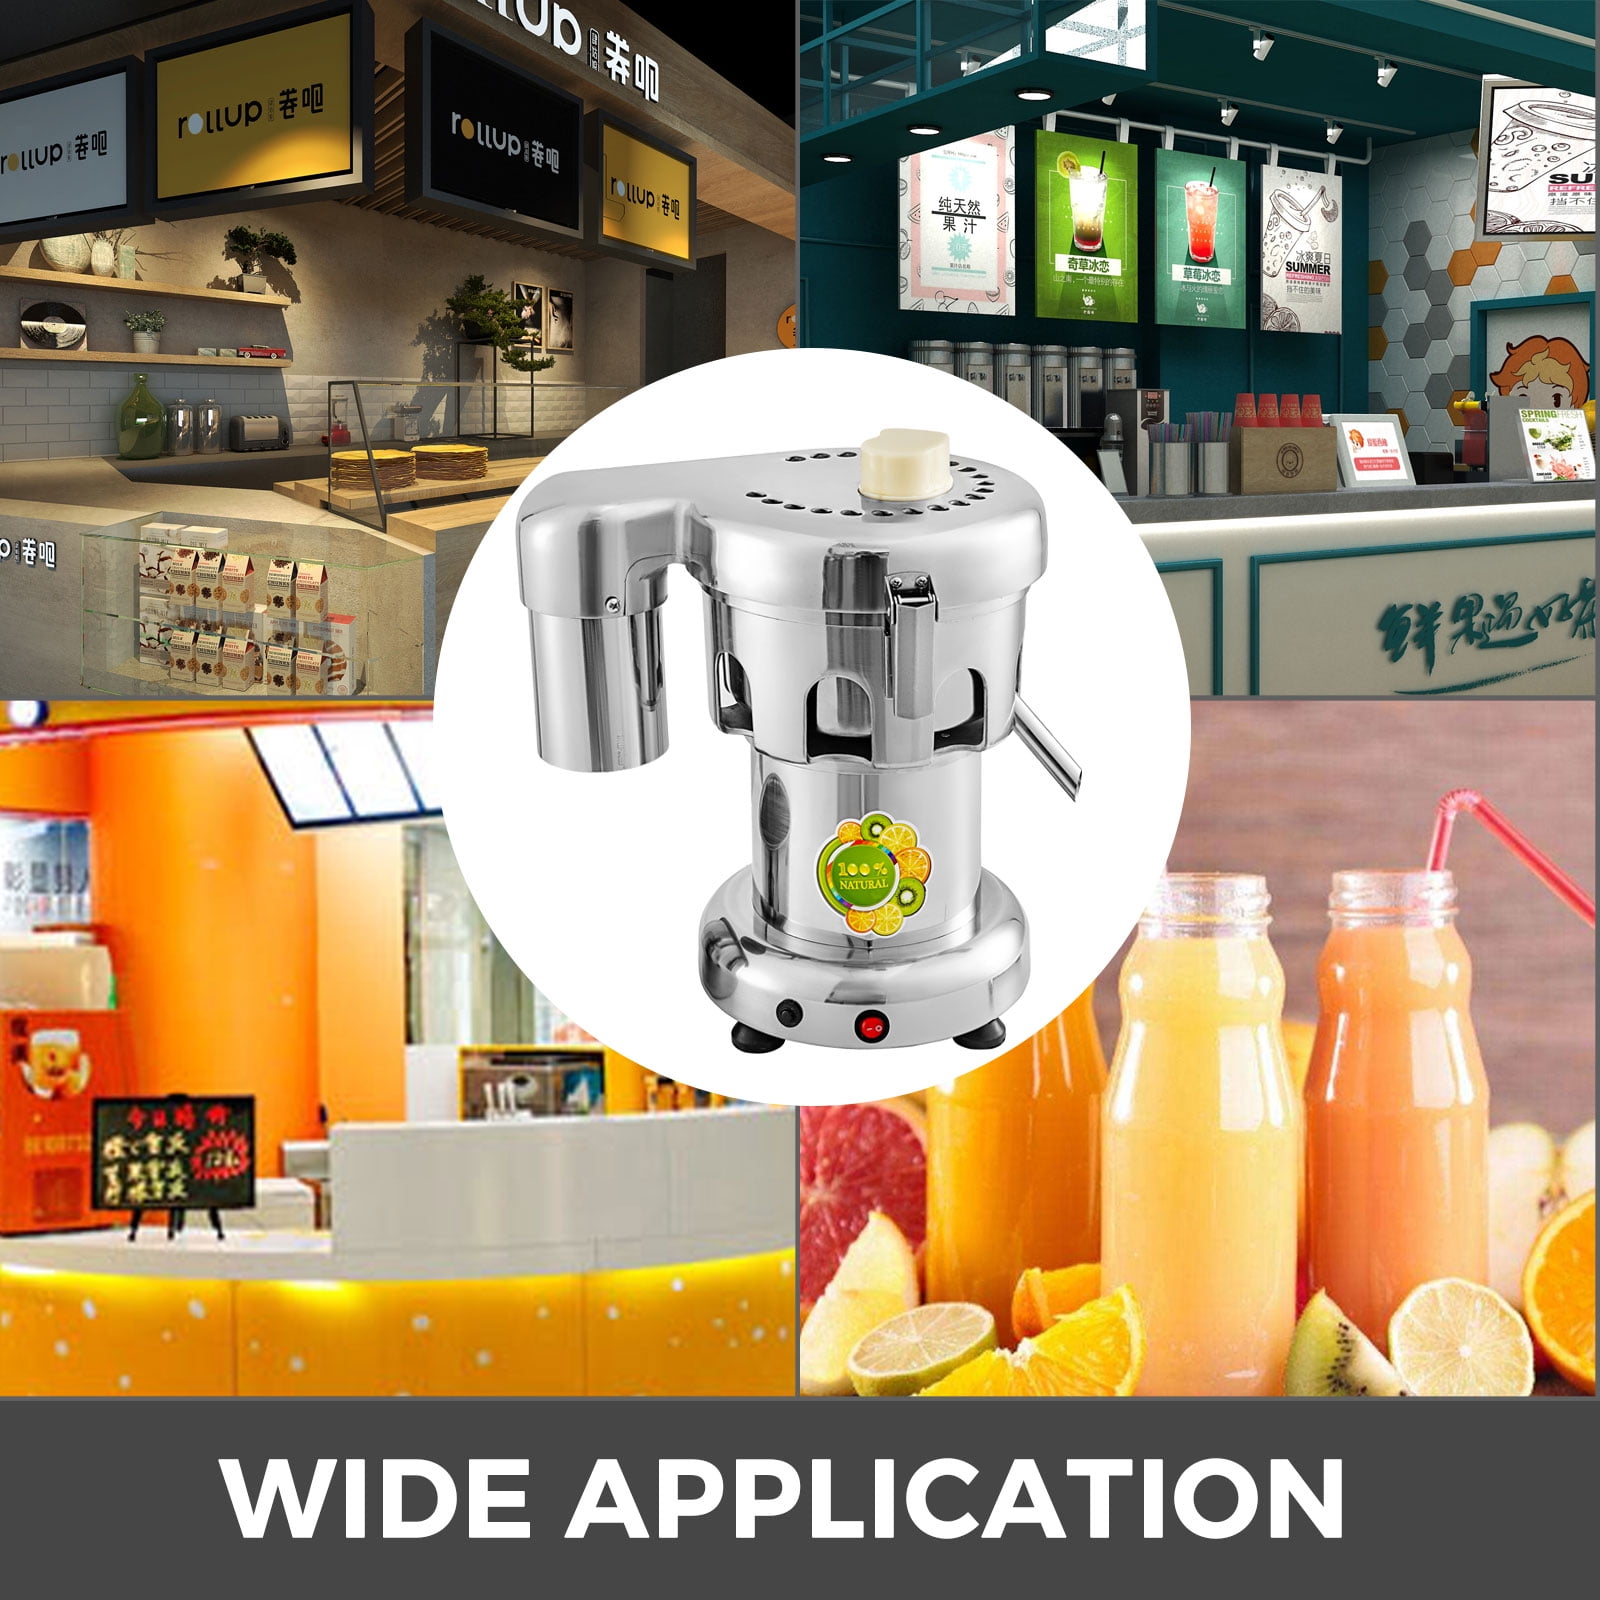 VBENLEM Commercial Juice Extractor Heavy Duty Juicer Aluminum Casting and Stainless Steel Constructed Centrifugal Juice Extractor Juicing Both Fruit